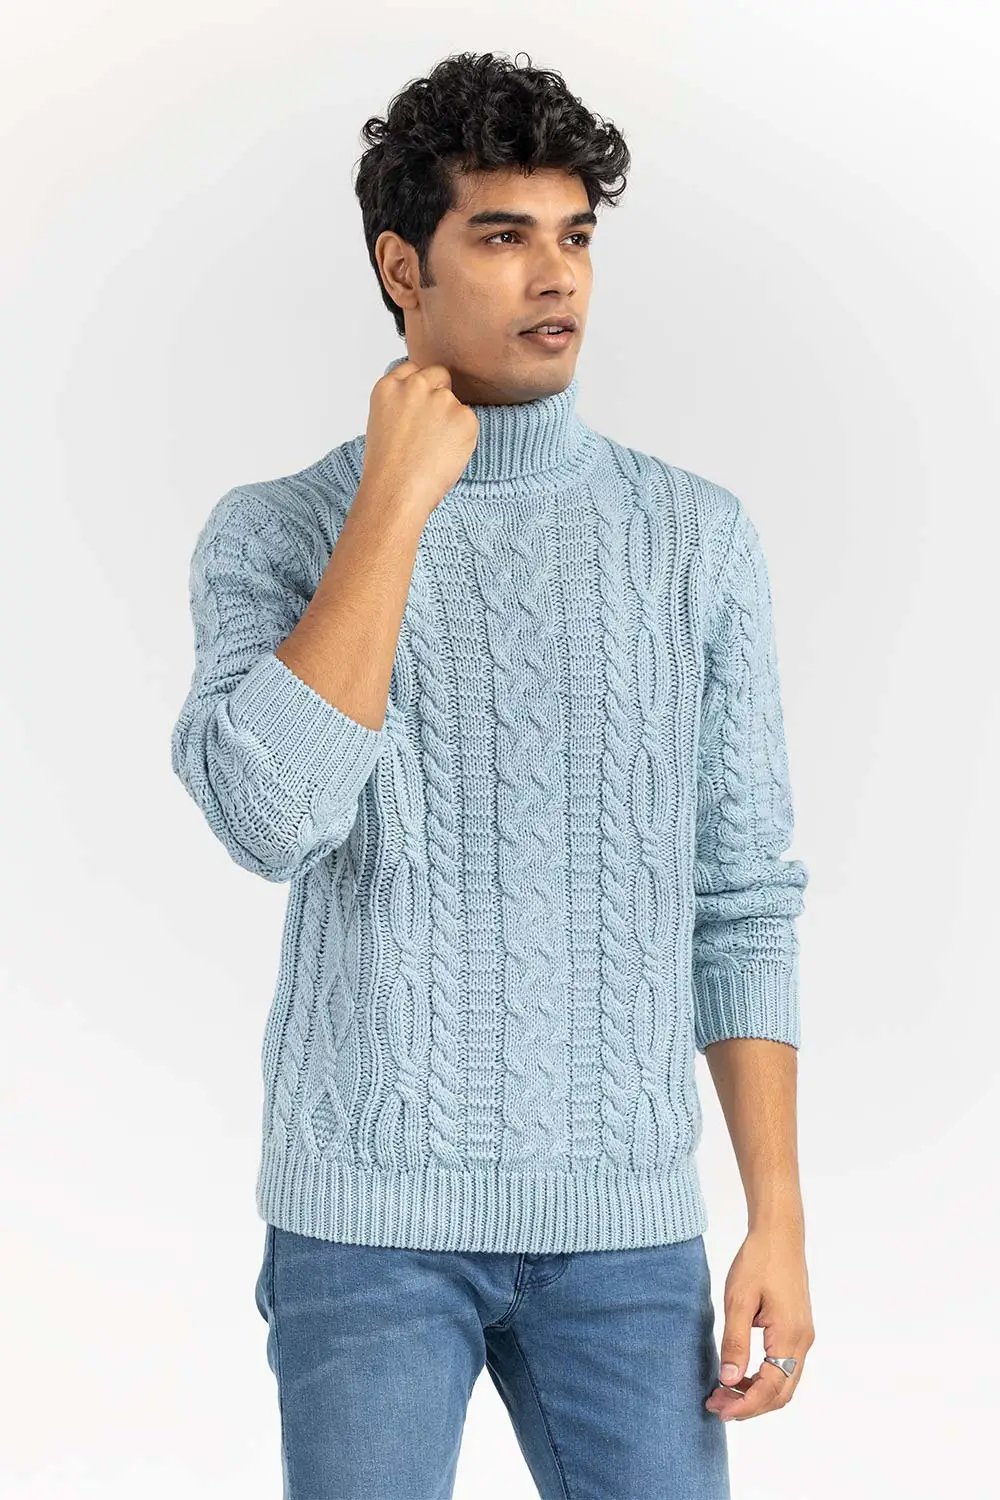 The Best Men's Sweaters for Every Occasion